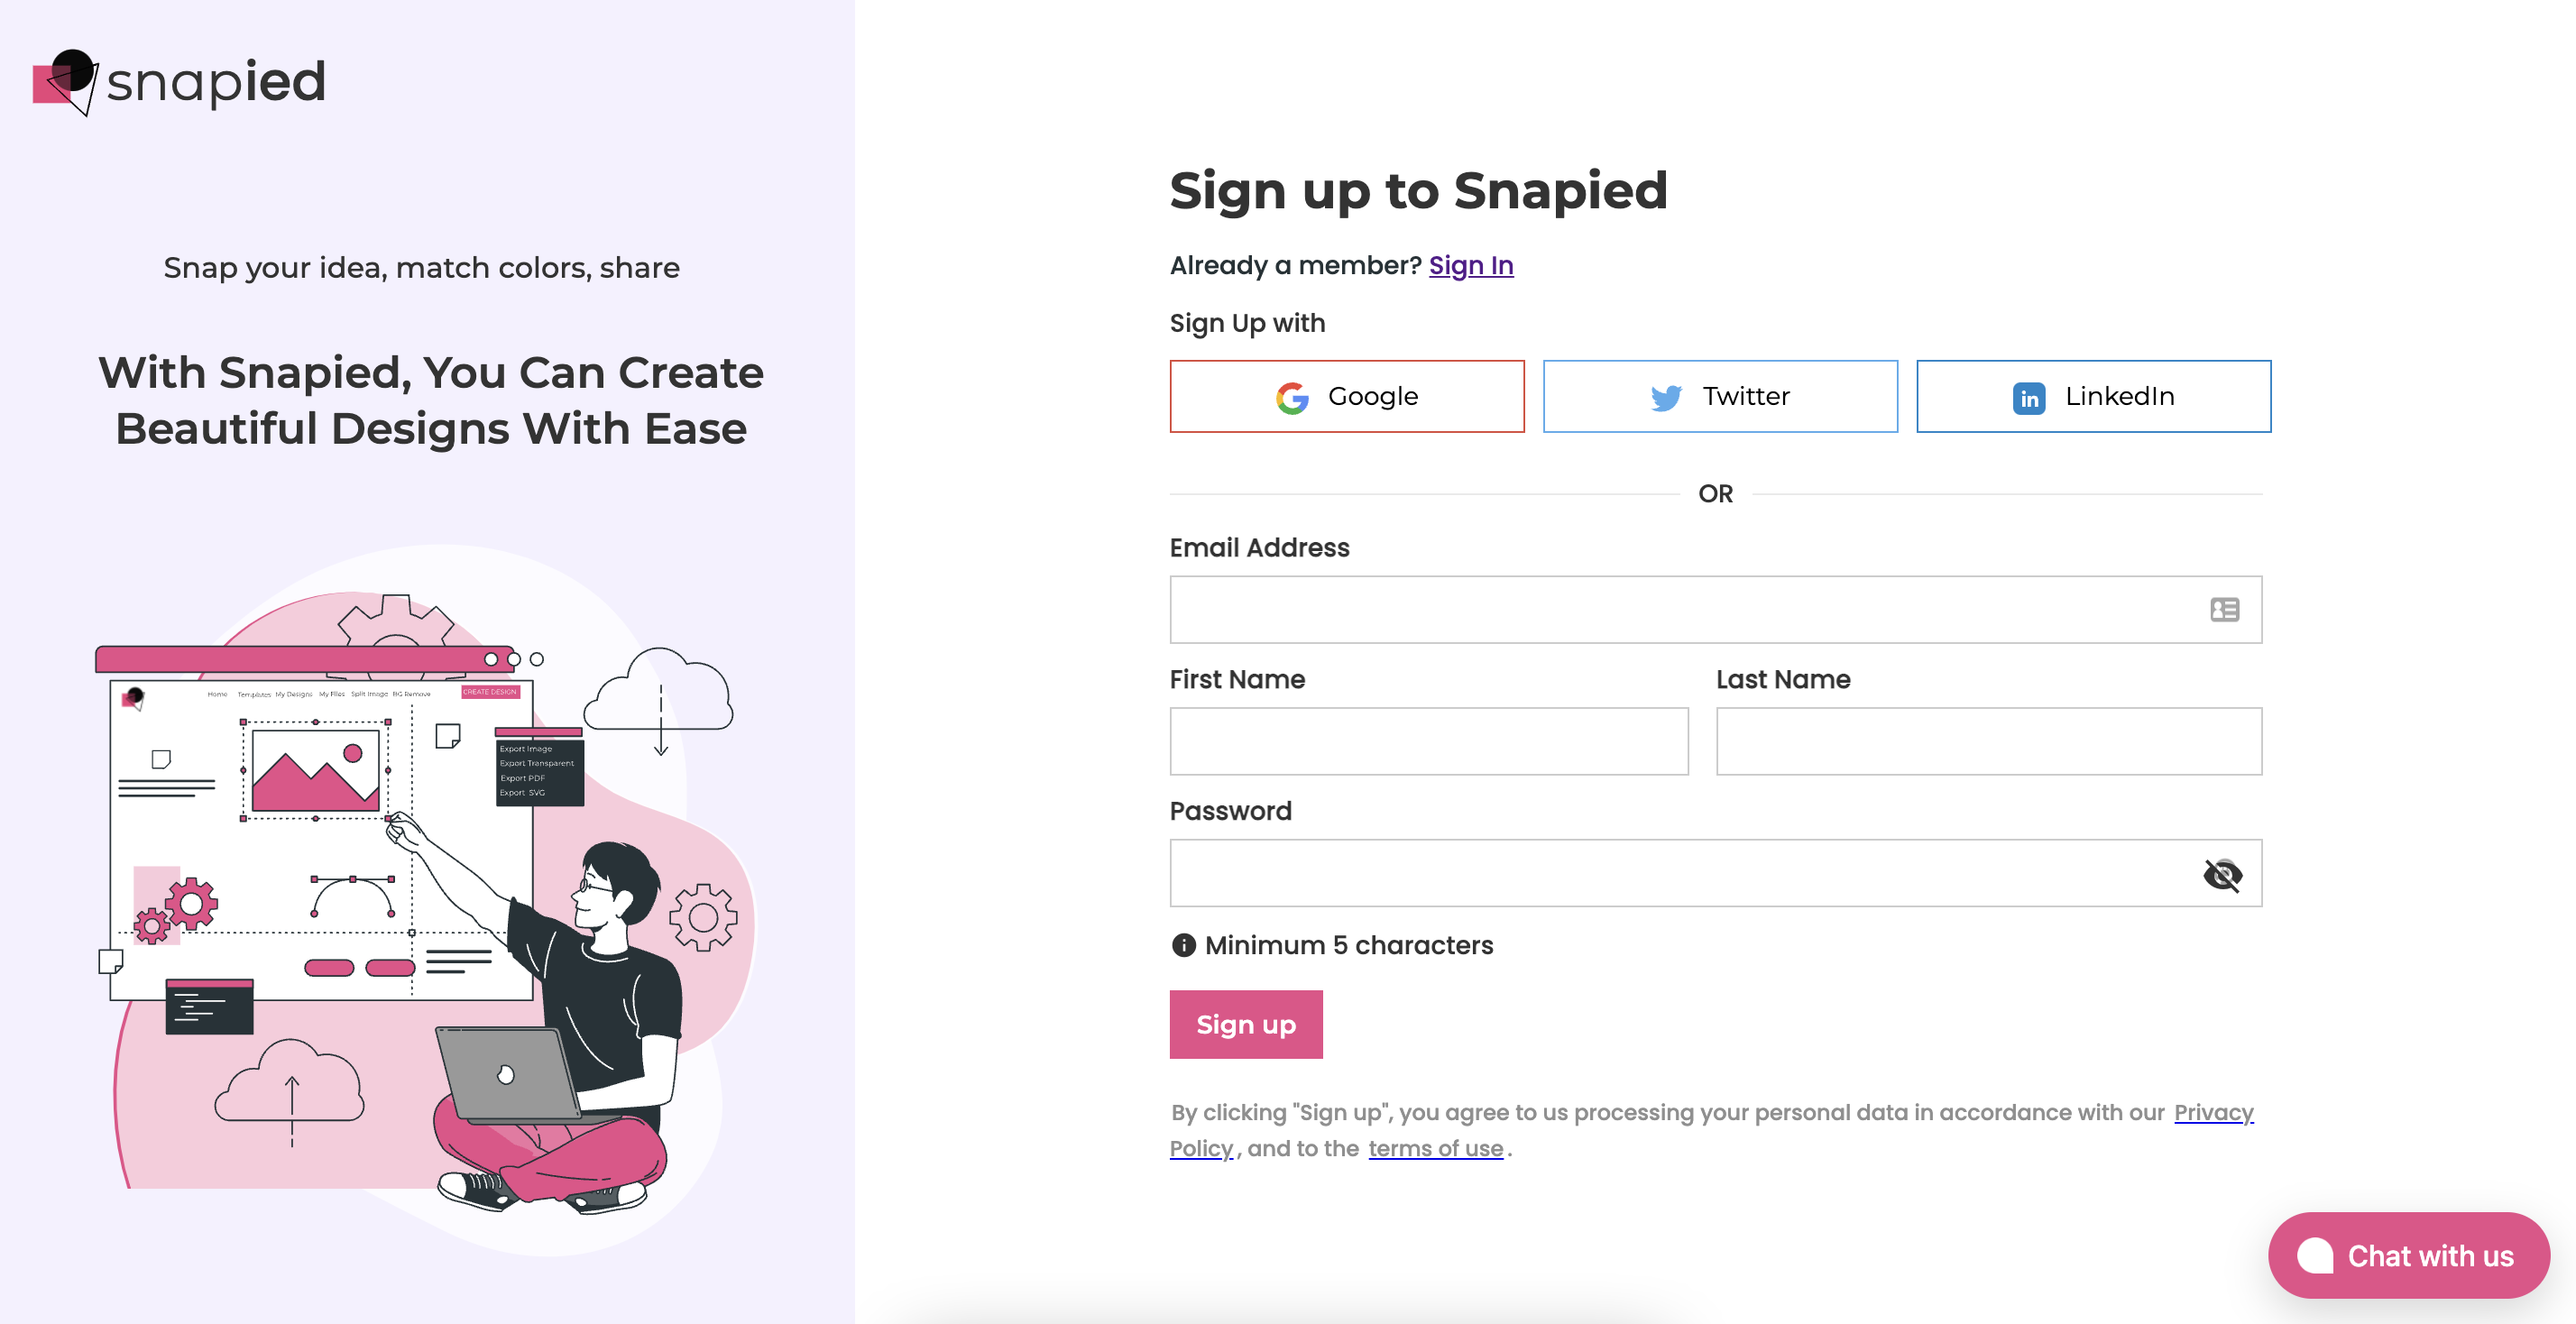 How to activate my Snapied account?